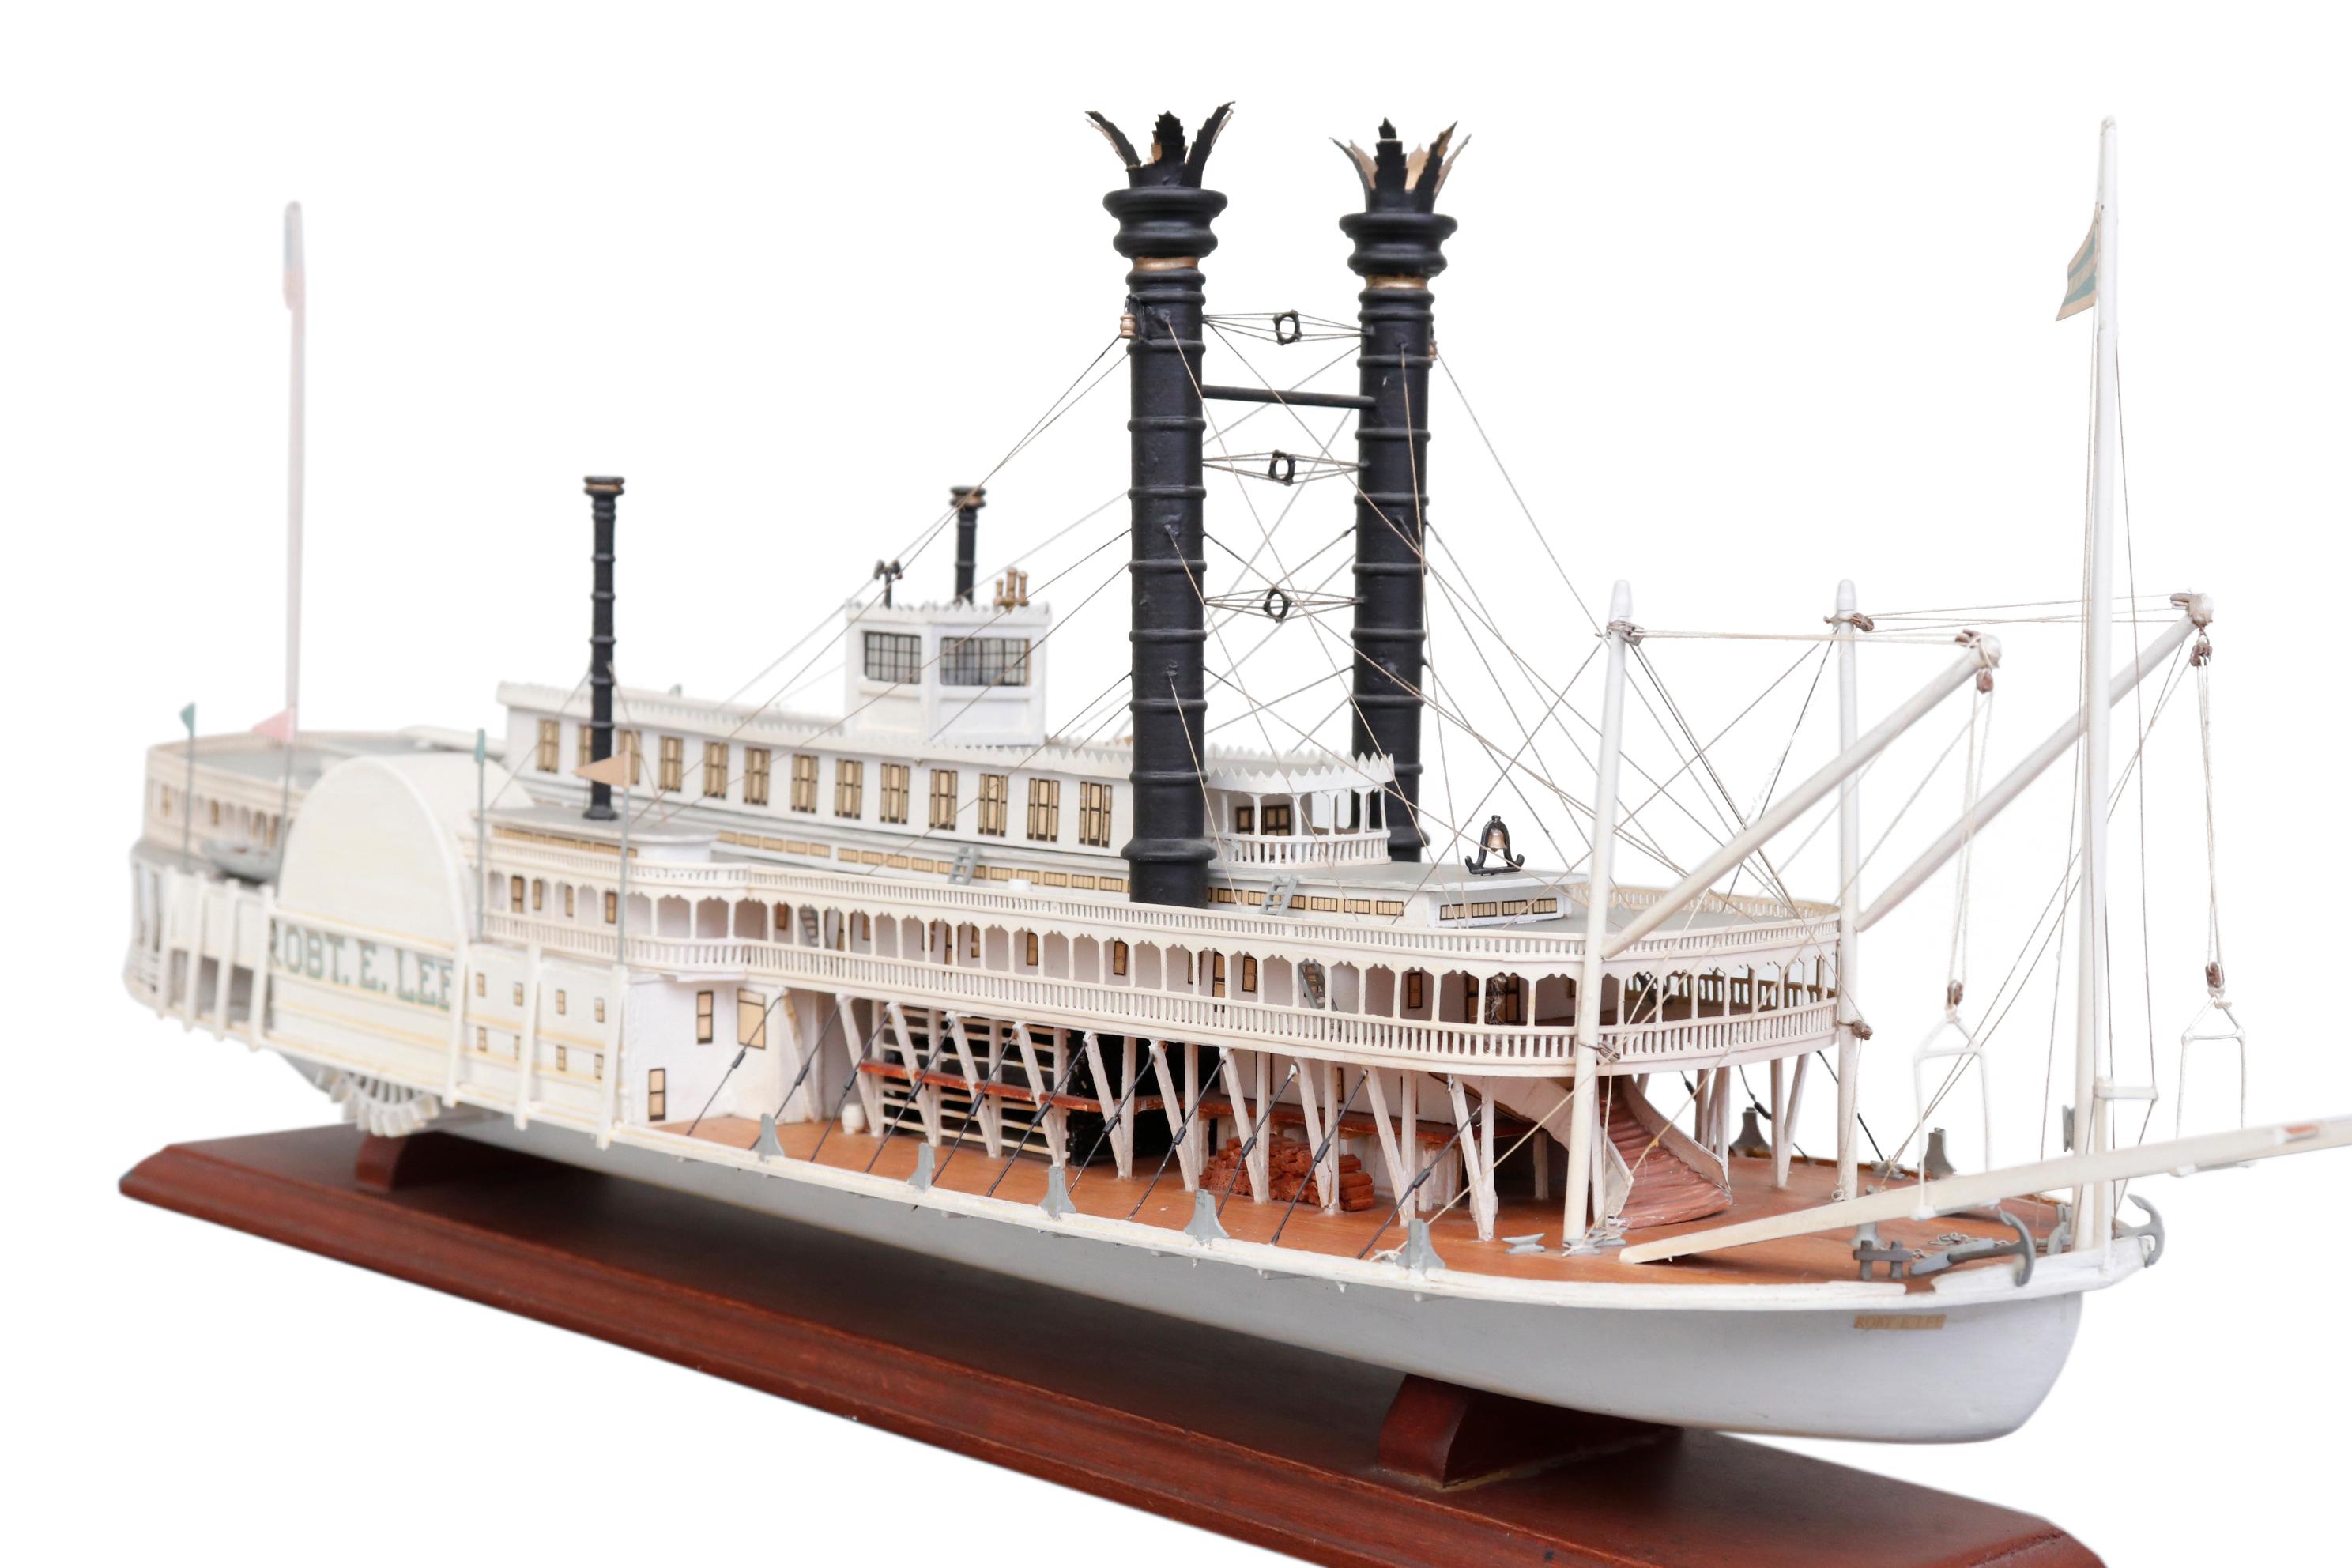 Exquisitely detailed model of the iconic Mississippi steam boat the ROBERT E. LEE.